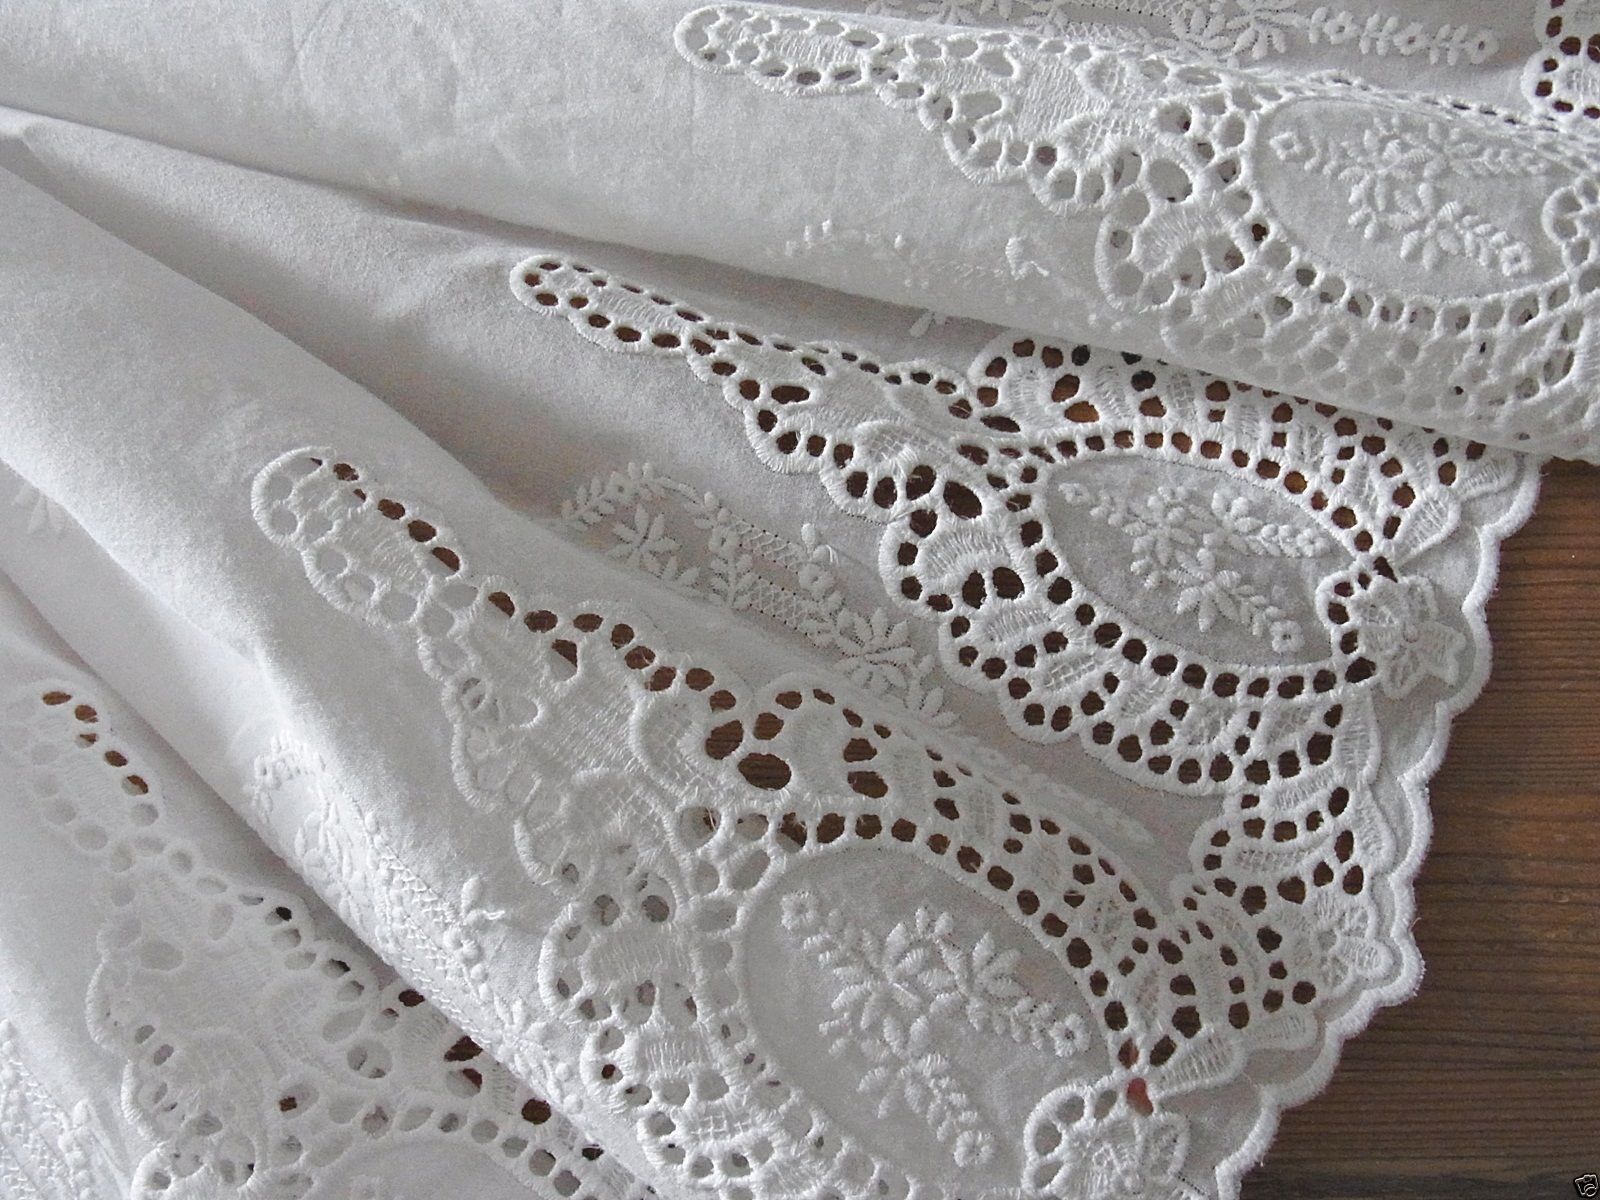 1 Yd Vintage Style Embroidery Cotton Eyelet Lace Fabric Off White 73cm  FreeShip